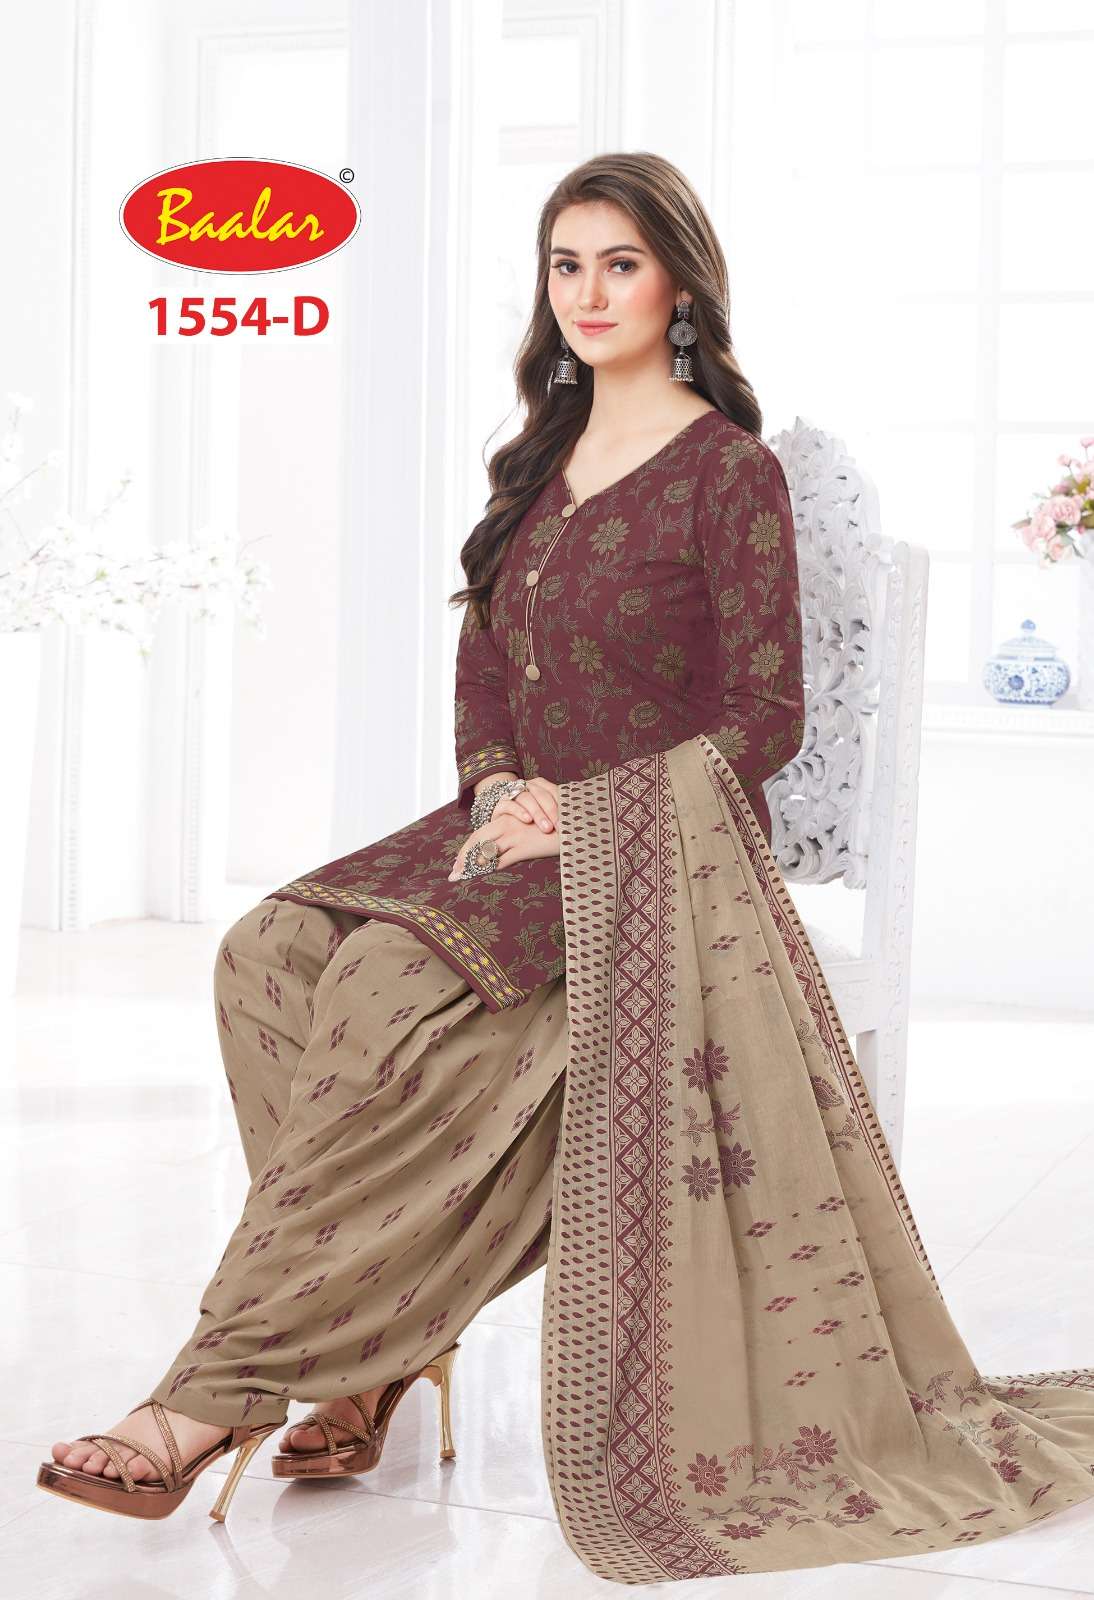 Baalar 6 Colour Matching series 1522 Cotton Printed suit